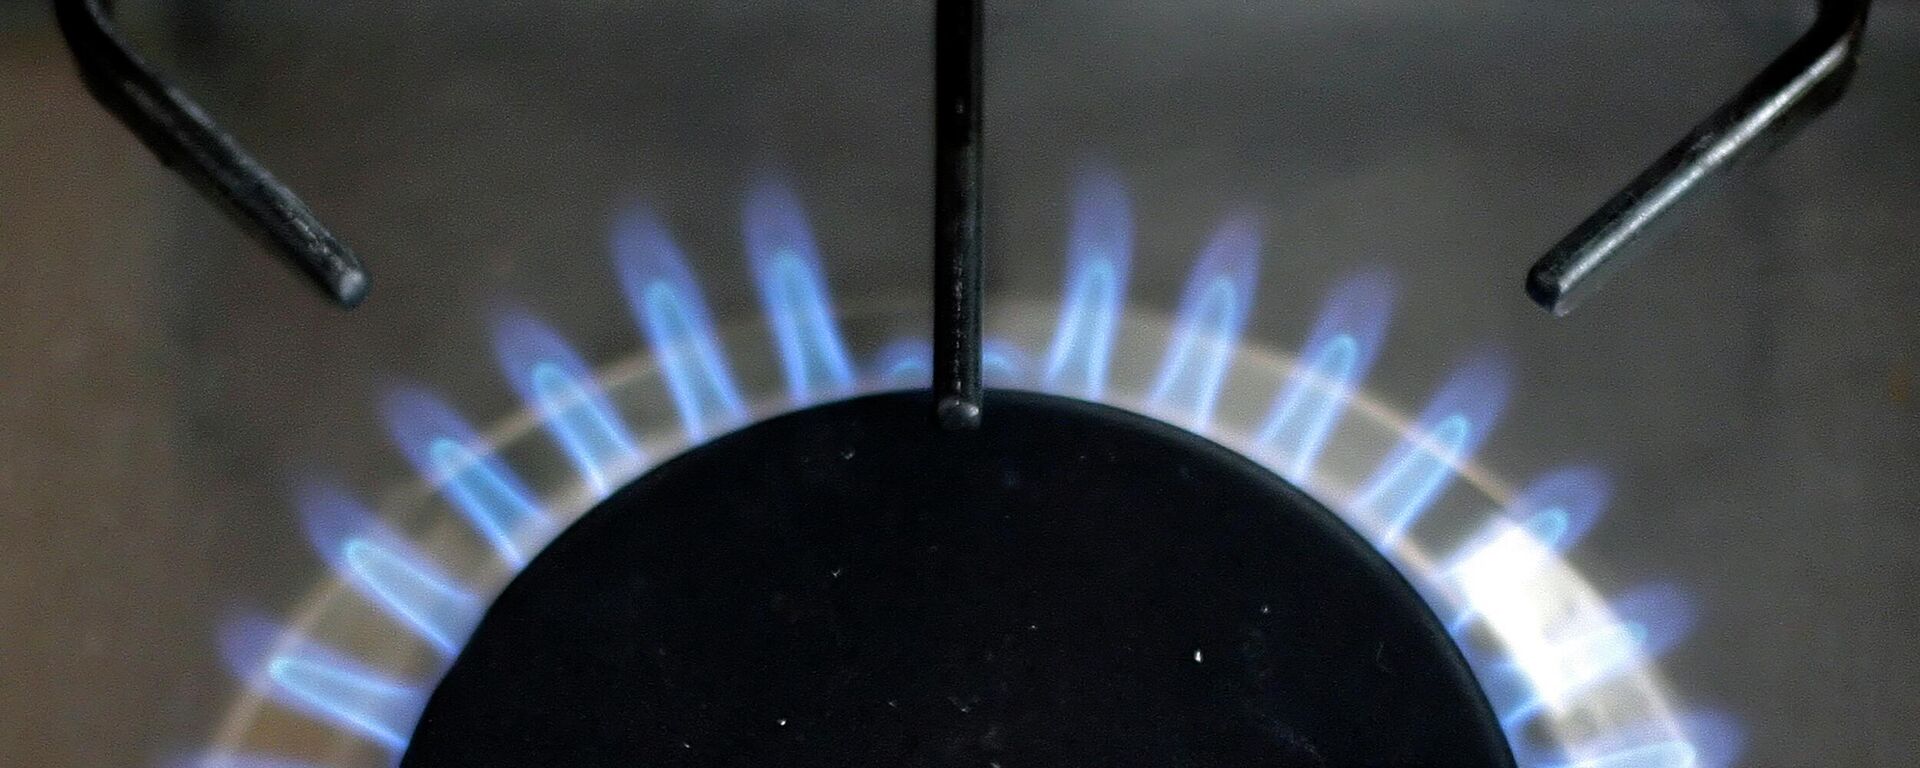 A gas burner of a stove is pictured in London, on July 31, 2008.  British energy firm Centrica said Thursday that net profit surged 79 percent to 1.802 billion pounds (2.286 billion euros, 3.569 billion dollars) in the first half as it charged more for its gas and electricity to fight soaring wholesale costs. - Sputnik International, 1920, 10.08.2022